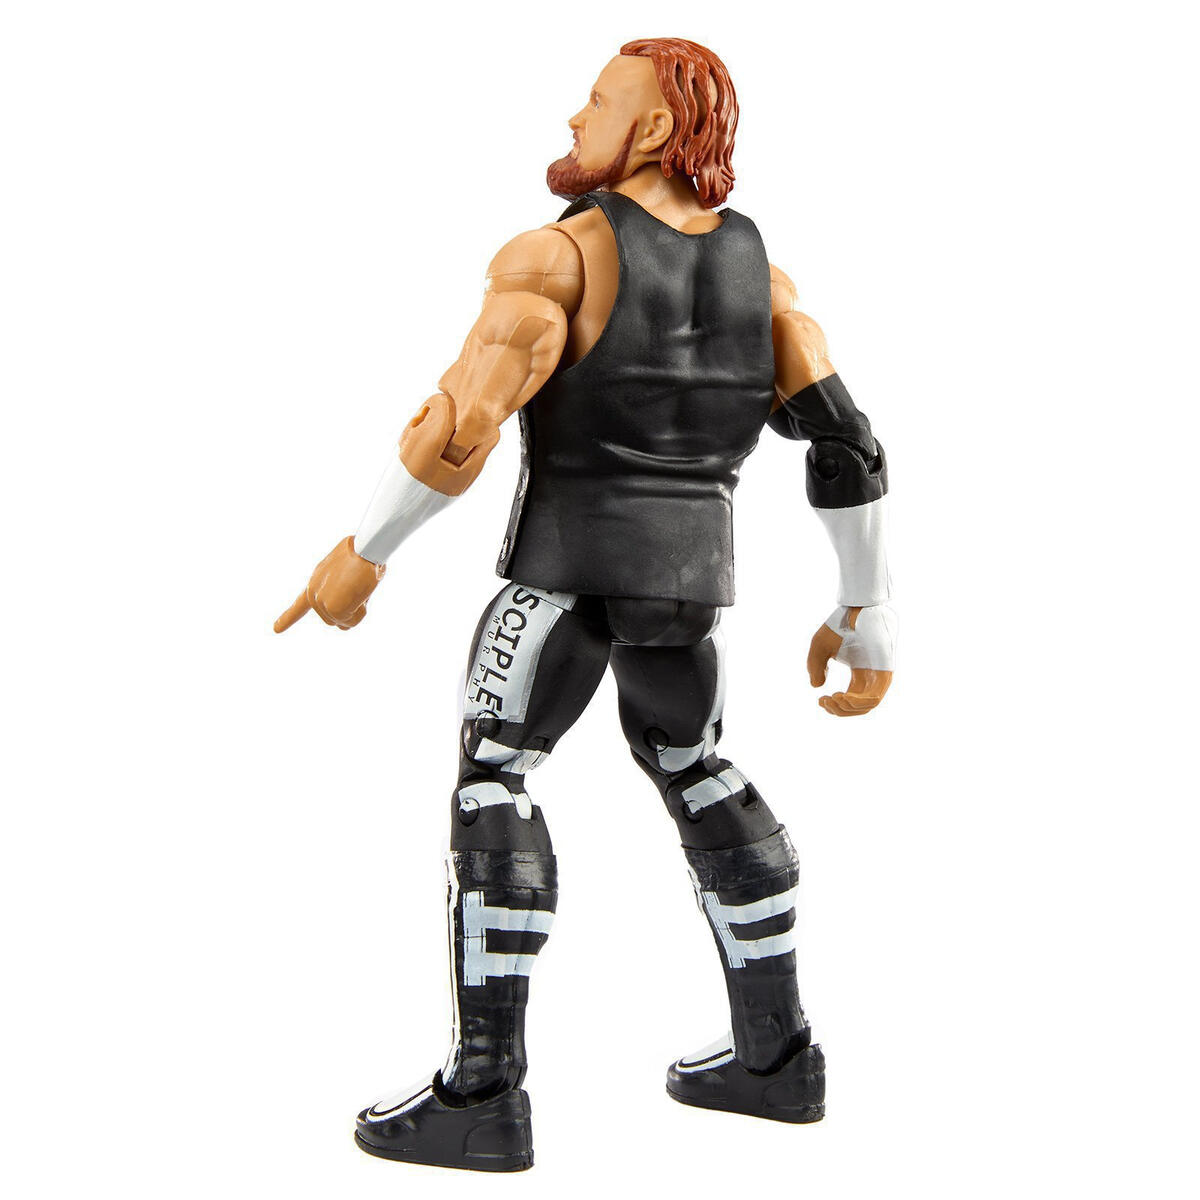 Mattel S Elite Collection Series 84 New Masters Of The Wwe Universe And More Photos Wwe